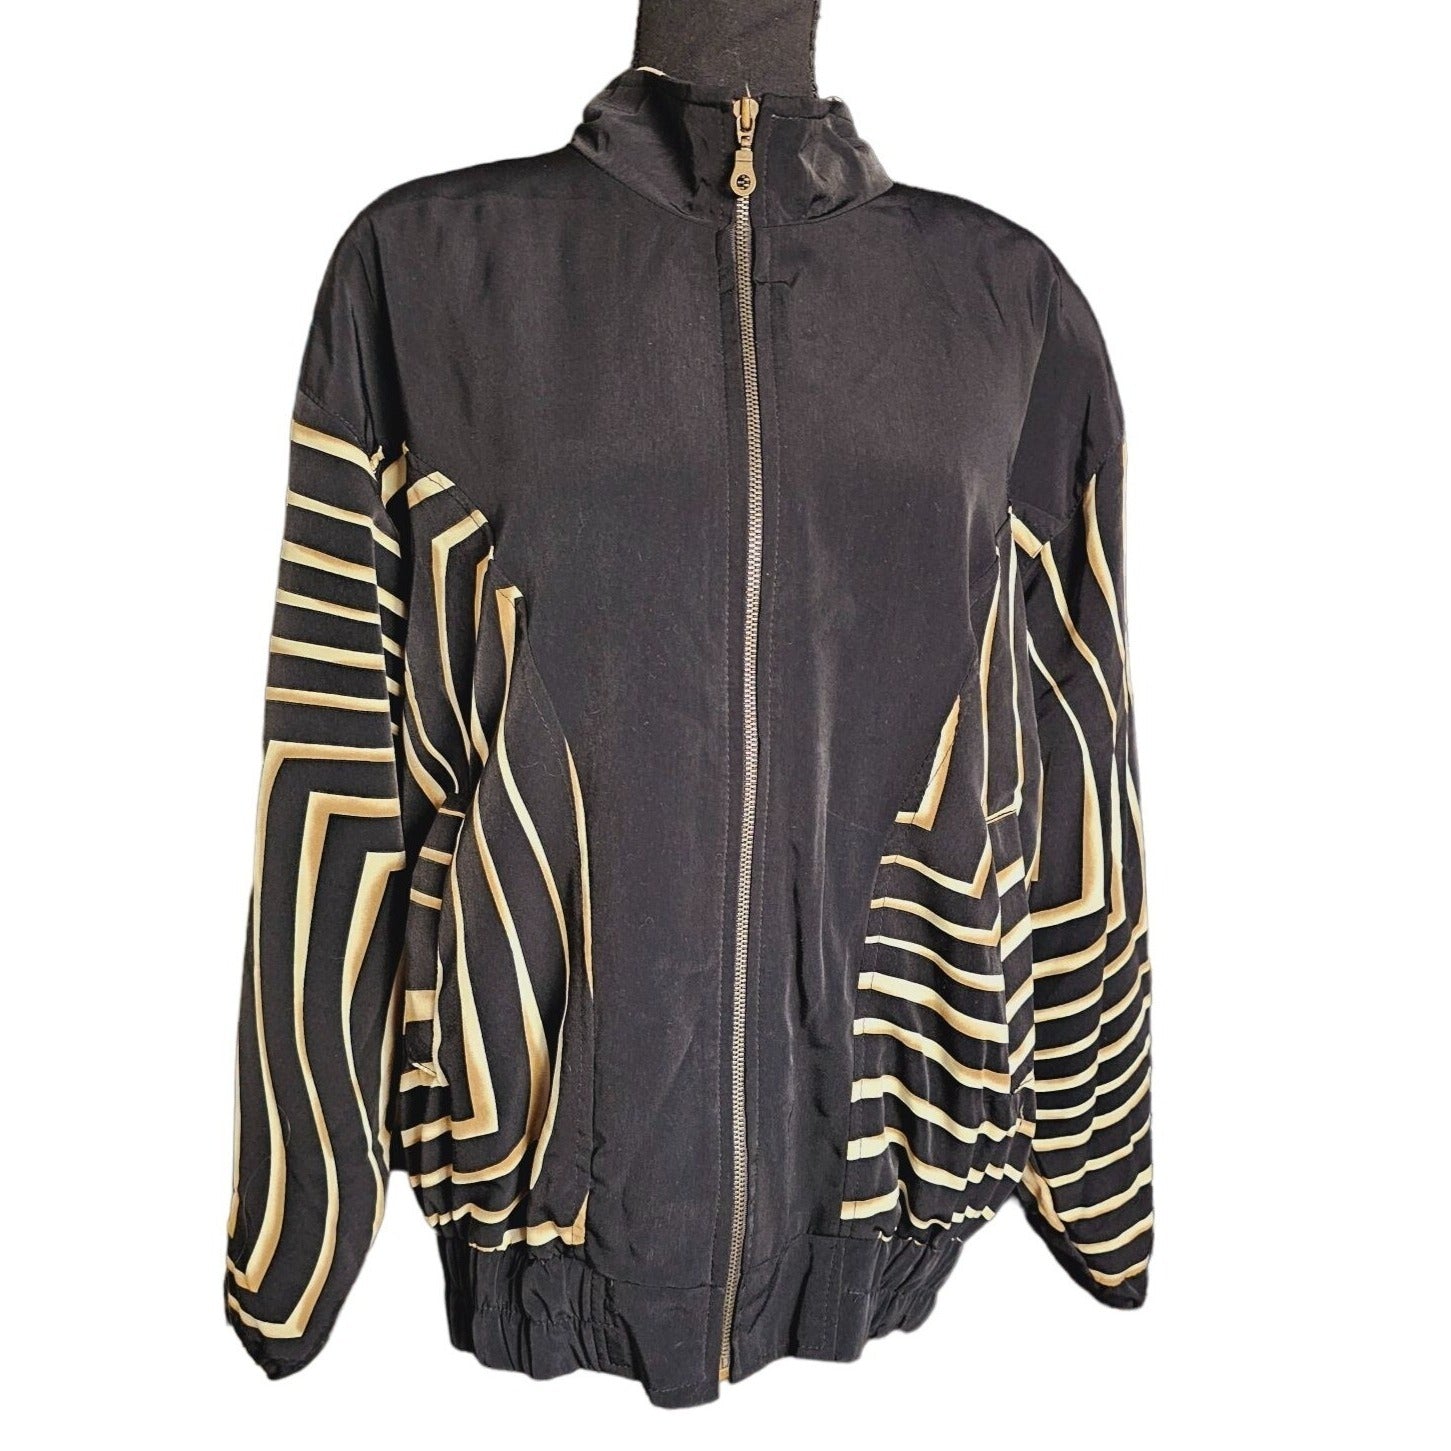 Rainbow Black and Gold Loose Fit Front Zip Windbreaker Jacket